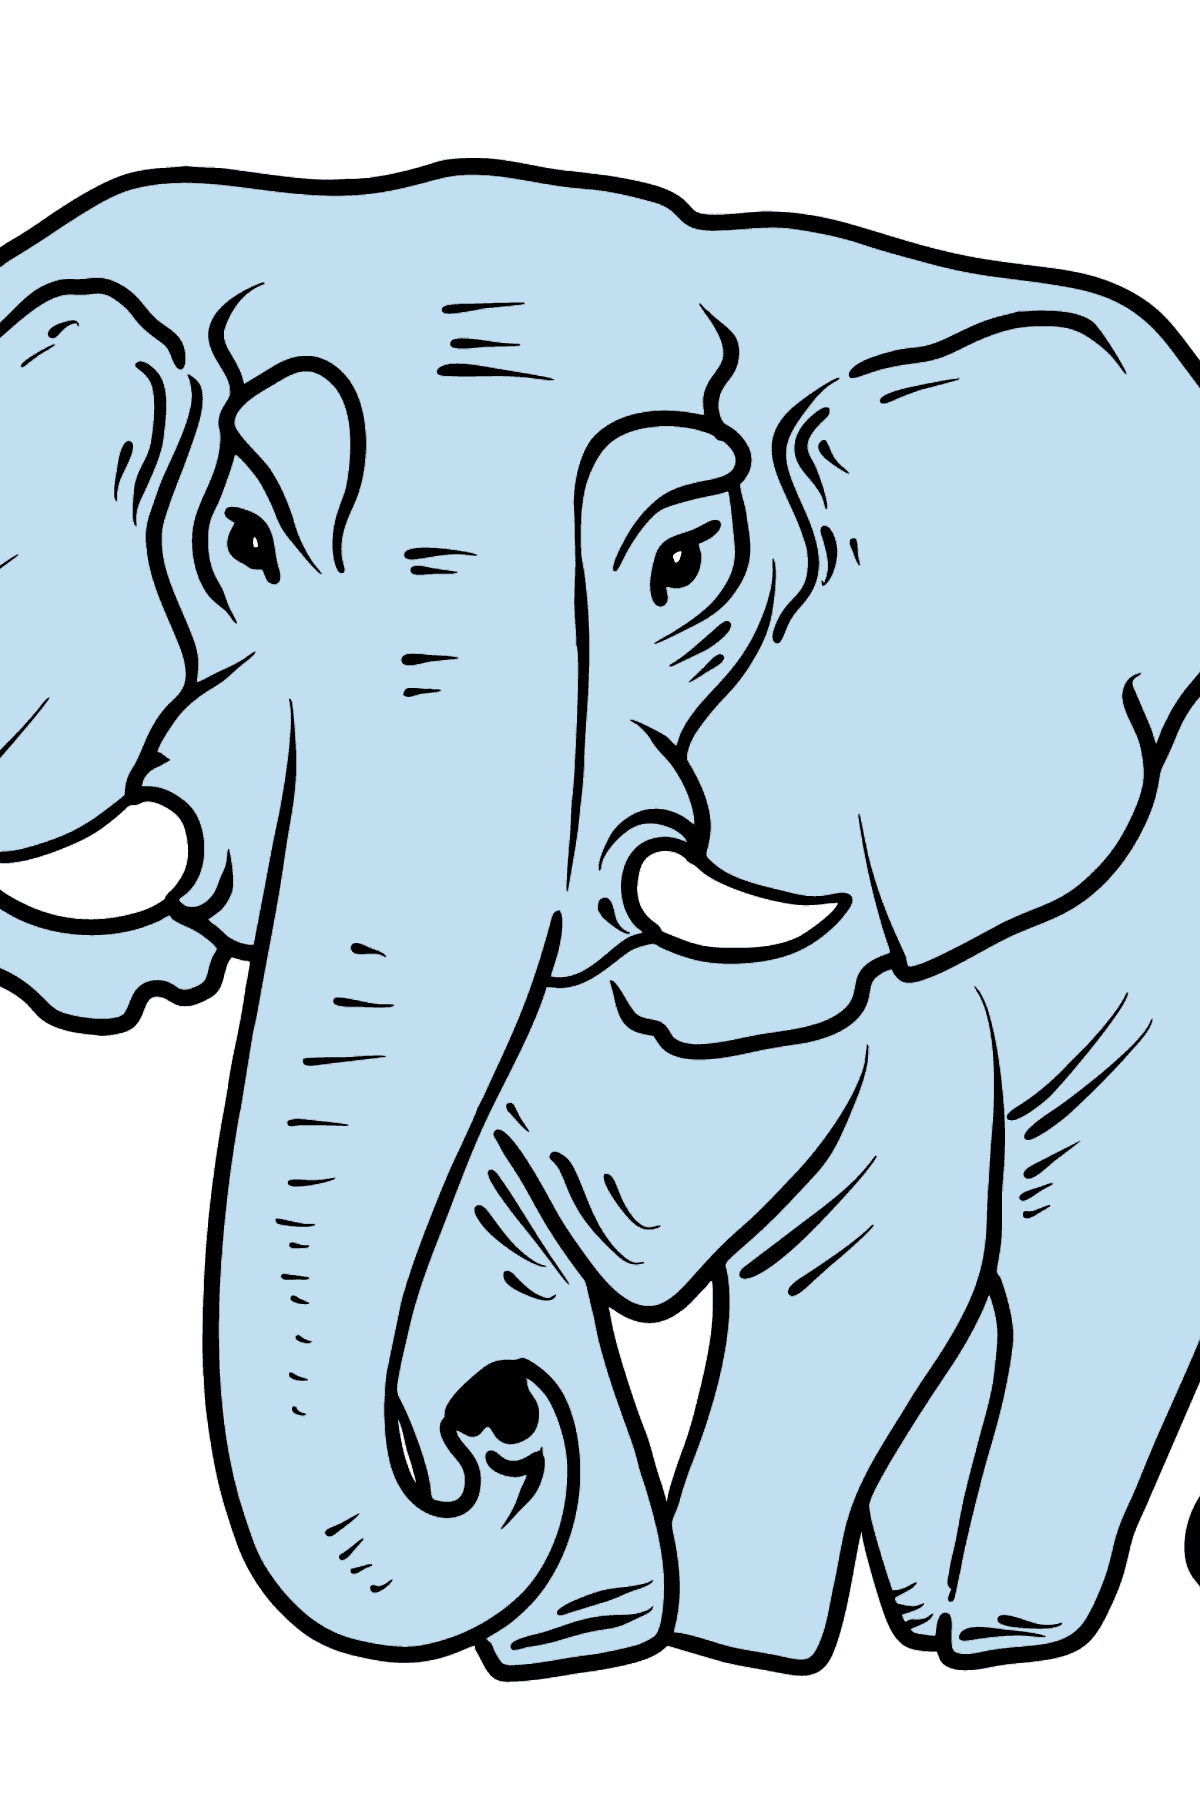 Elephant coloring page - Coloring Pages for Kids